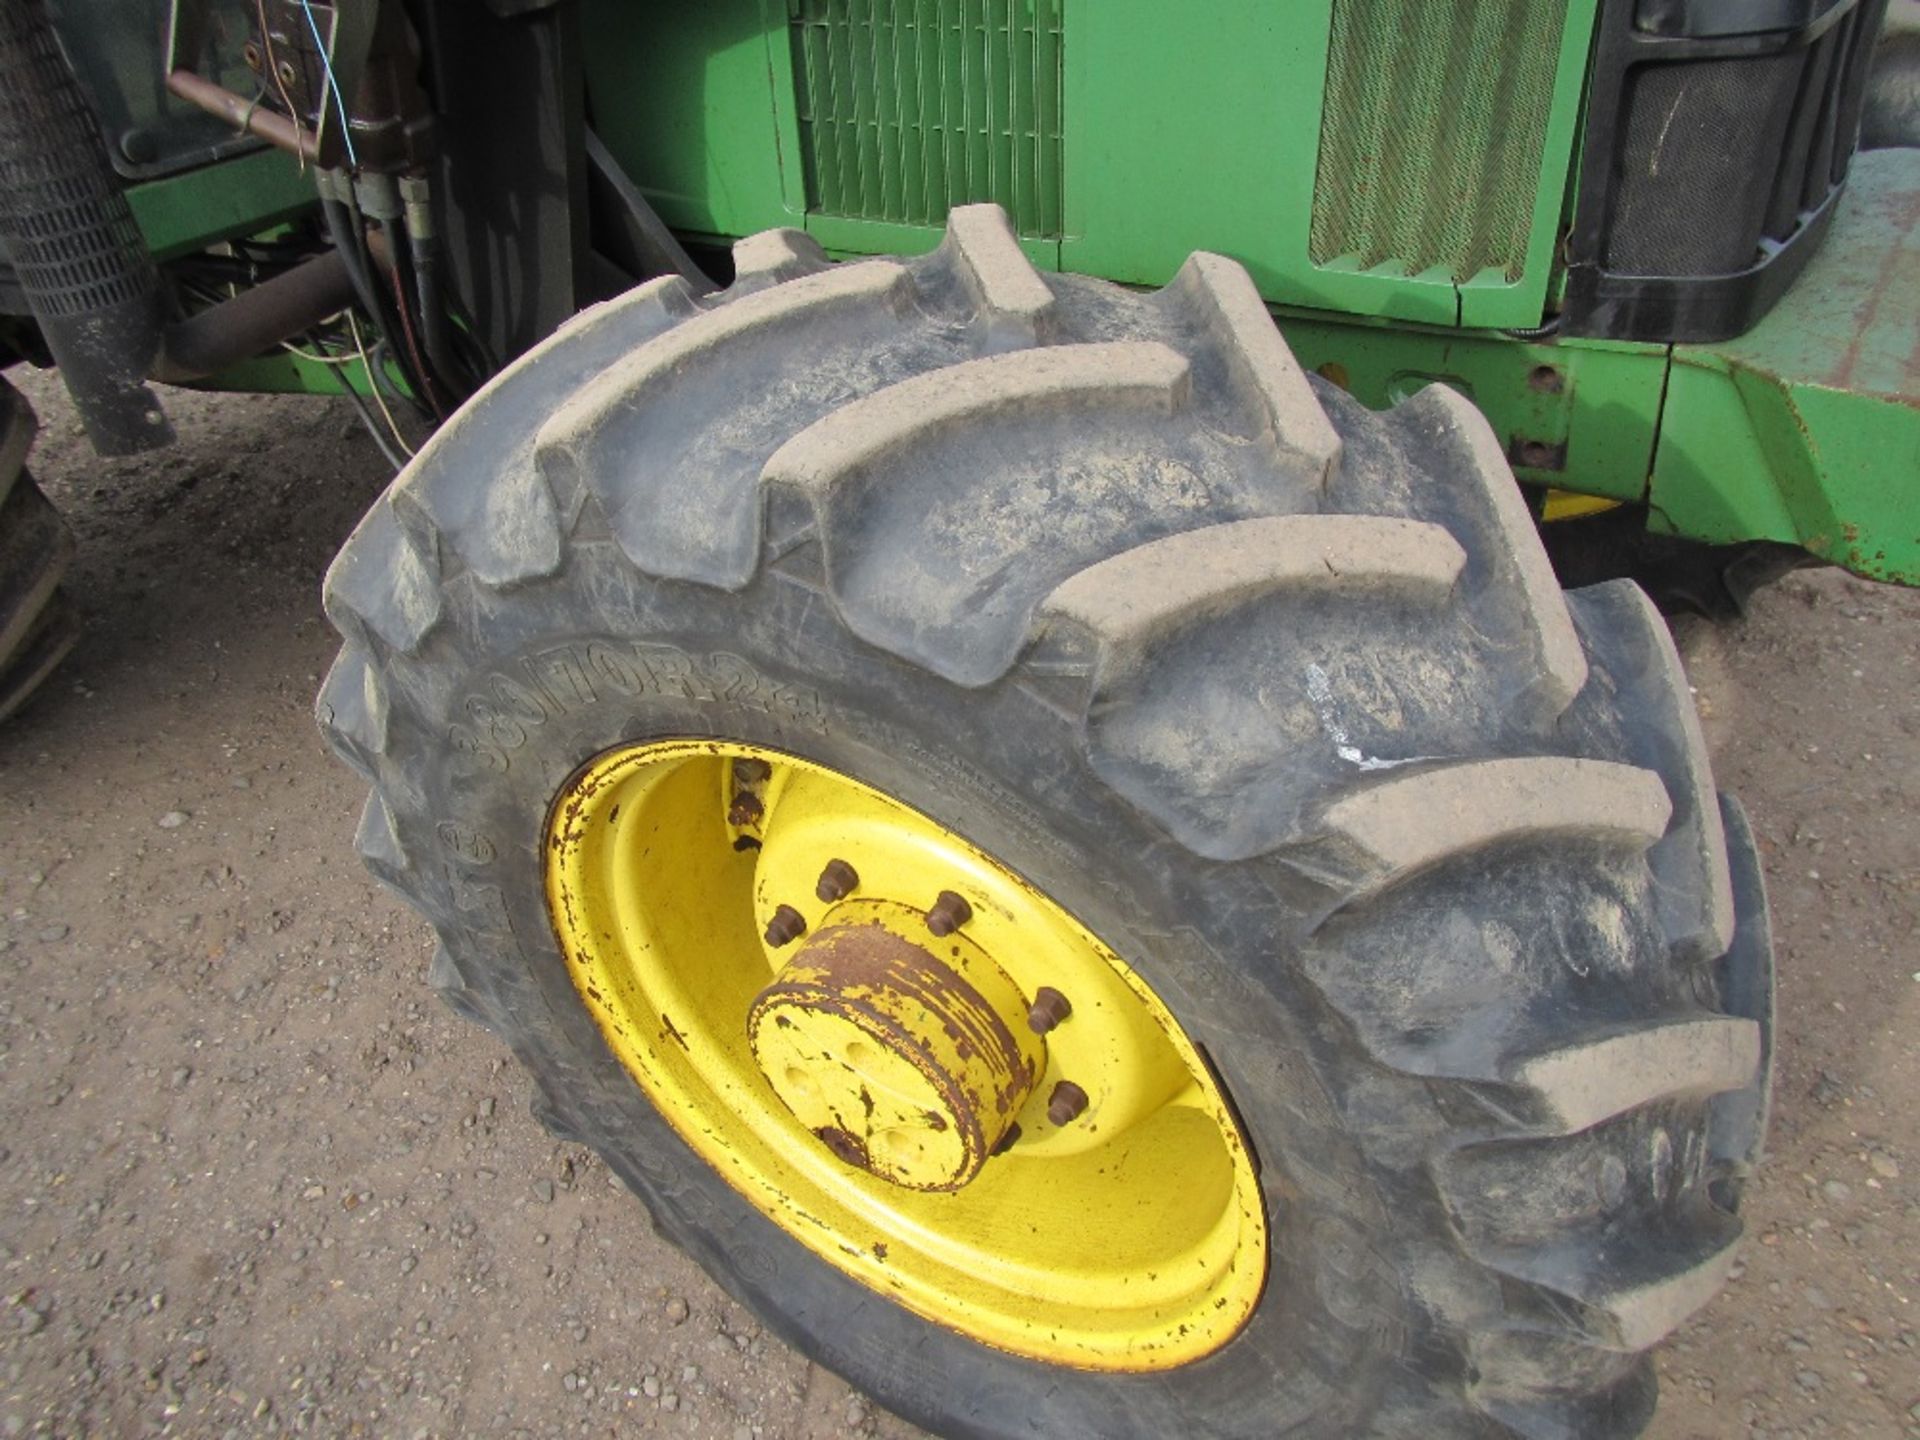 John Deere 6100 Power Quad Tractor with Loader. Reg Docs will be supplied Ser No 156383 - Image 5 of 18